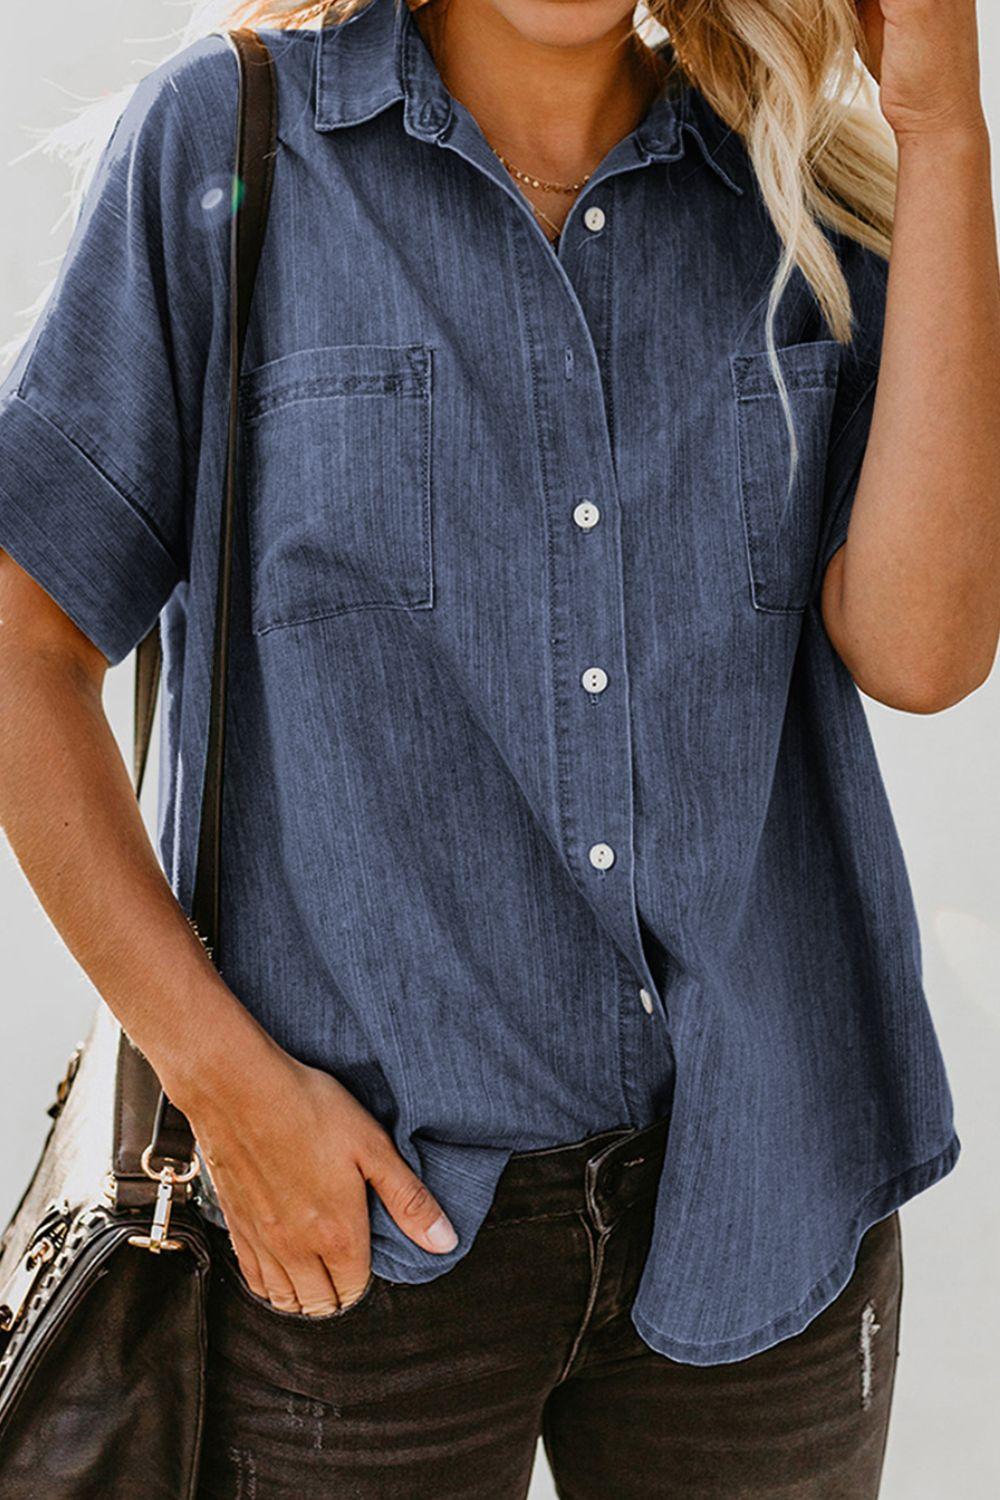 a woman wearing a denim shirt and brown pants